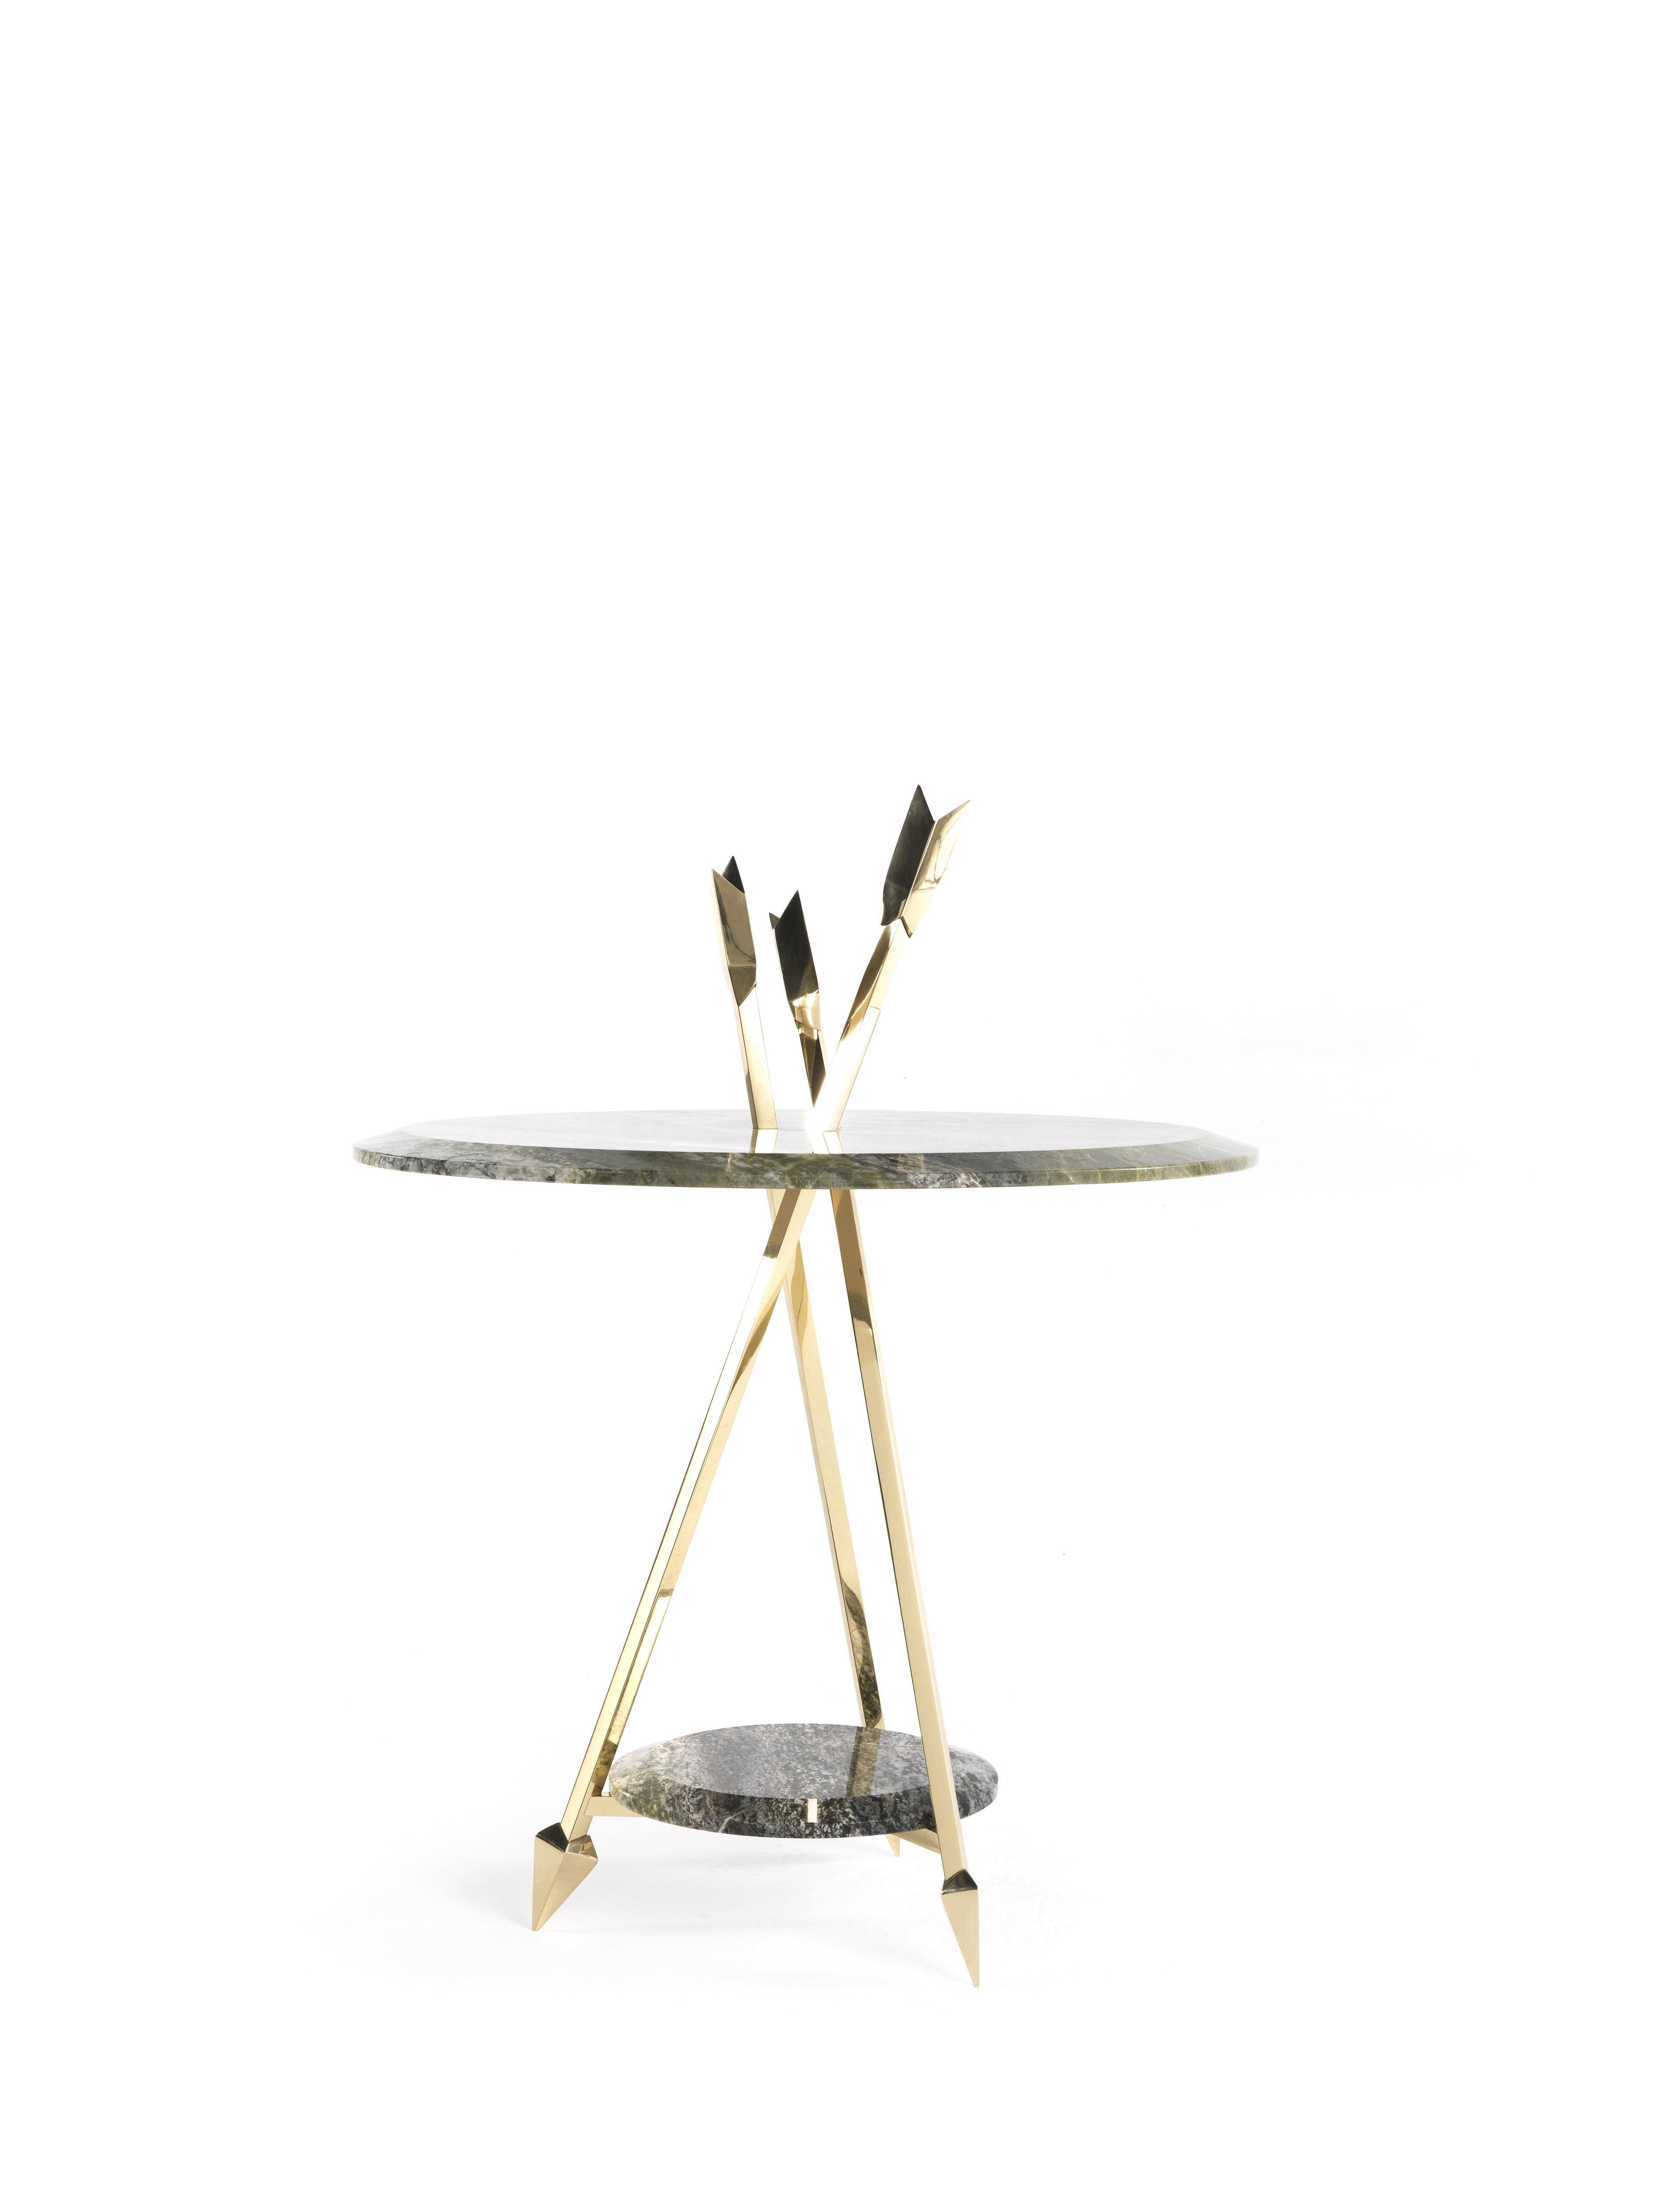 Three arrows in polished brass breach the marble top of the Sagitta table, passing through it and creating a support for the lower top. The evident mythological inspiration embodied in the theme of the arrow acquires a new nuance, more precious and